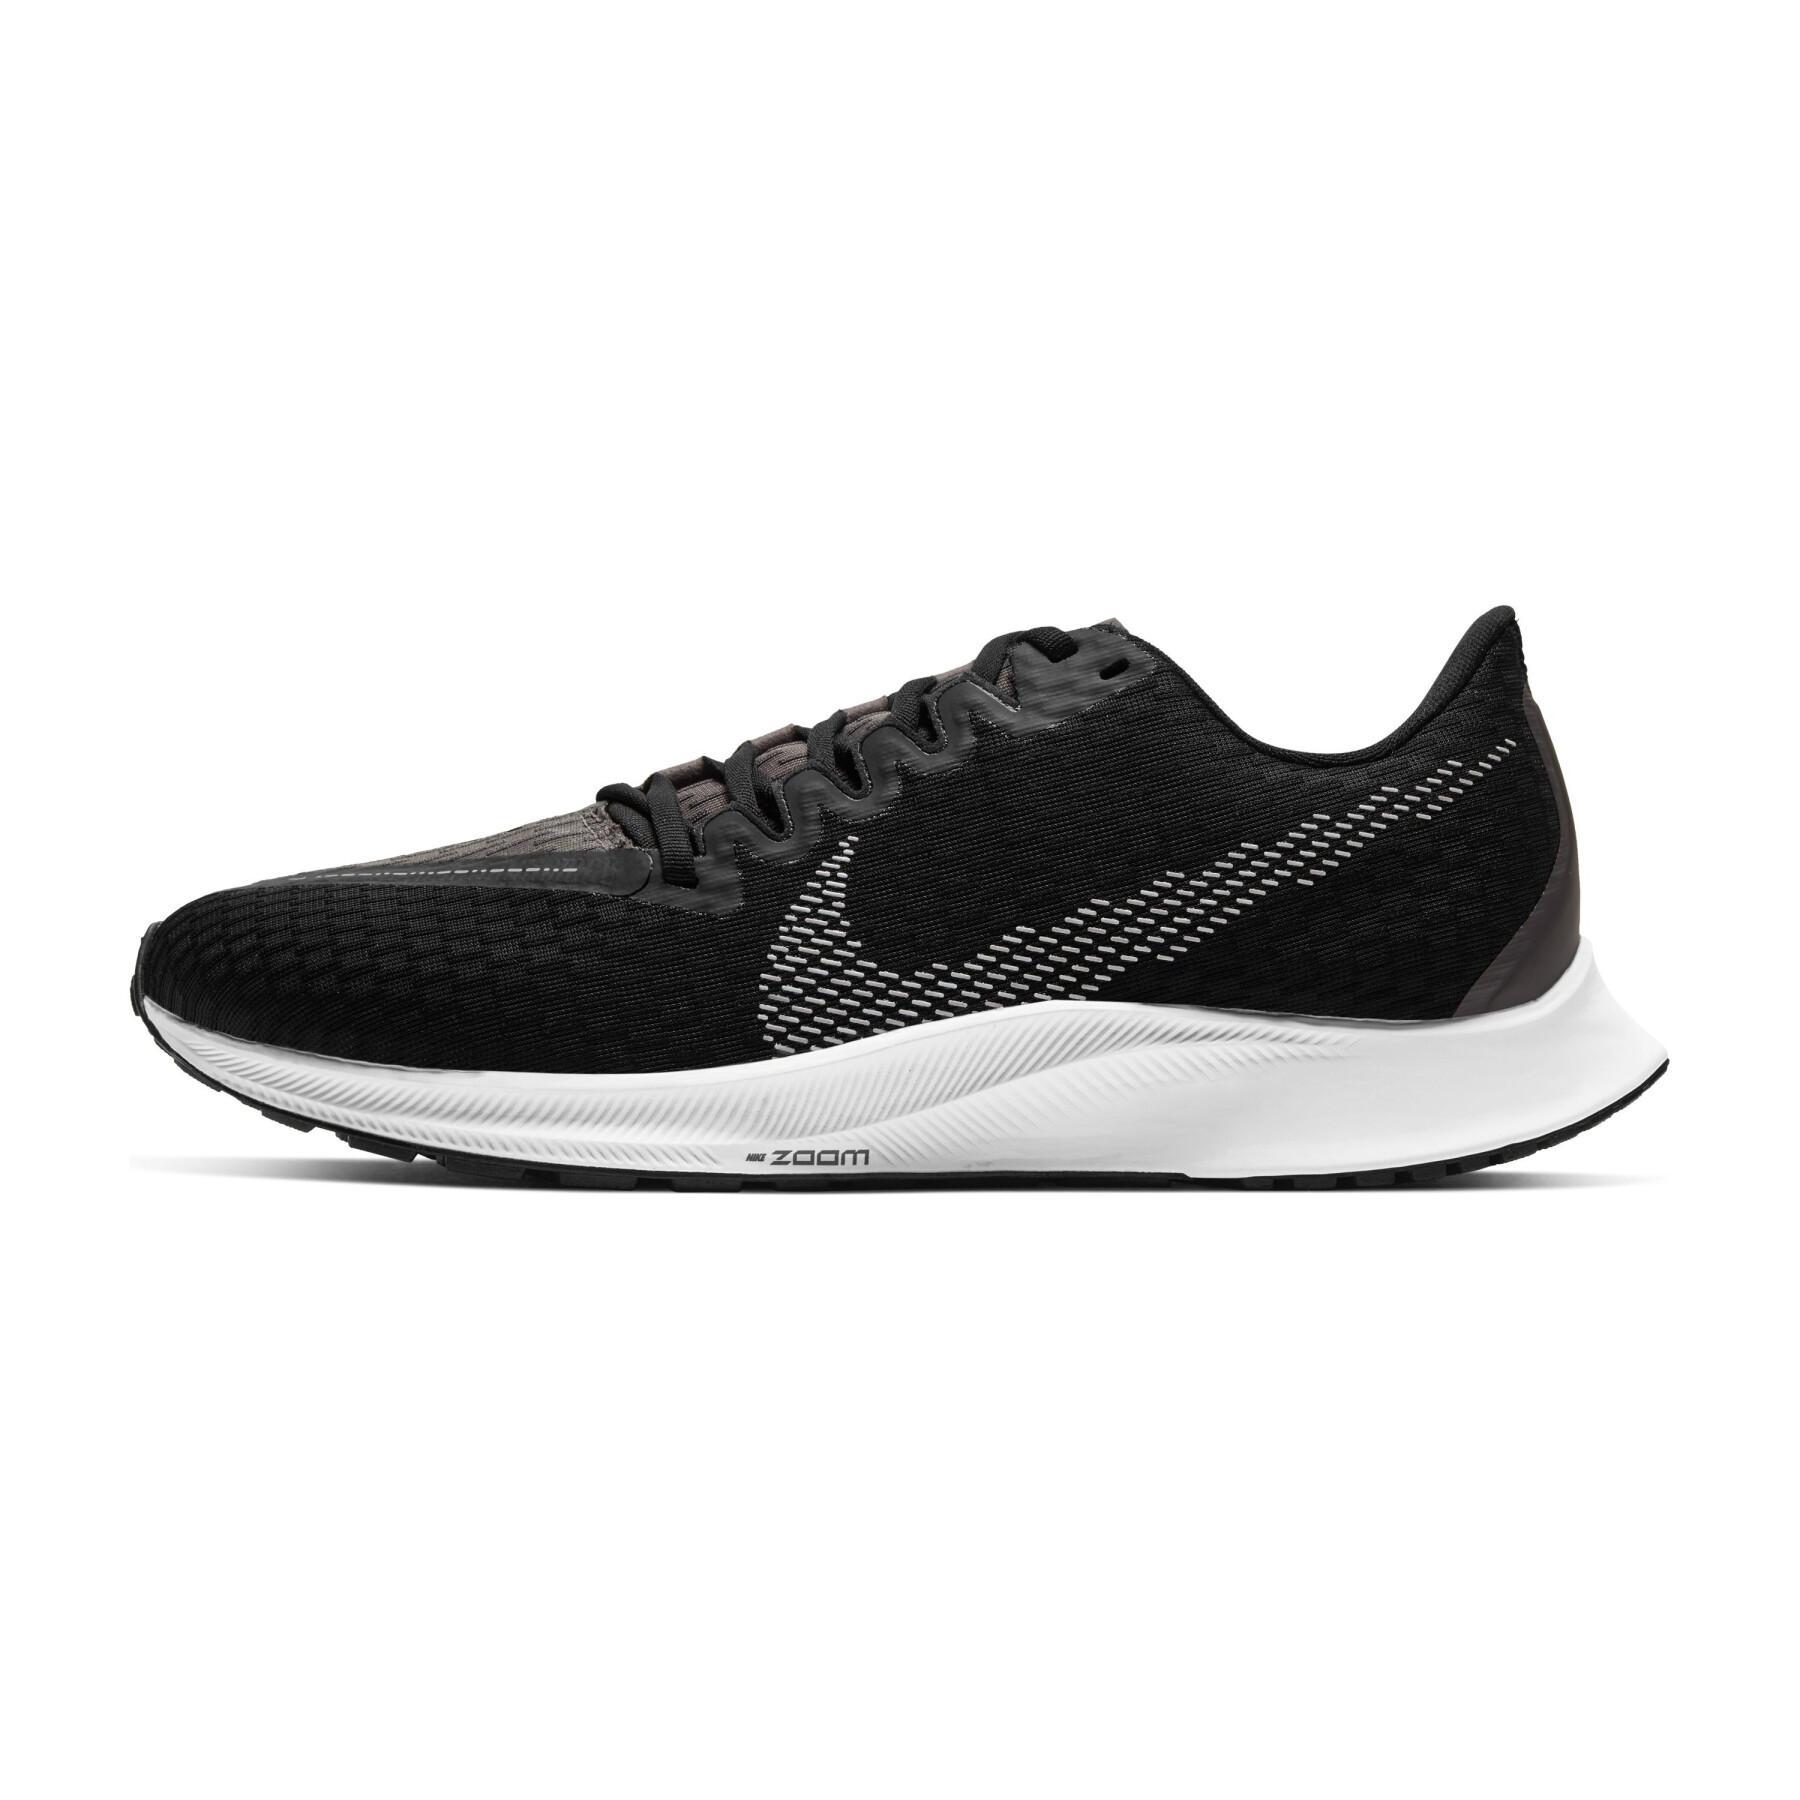 Women's shoes Nike Zoom Rival Fly 2